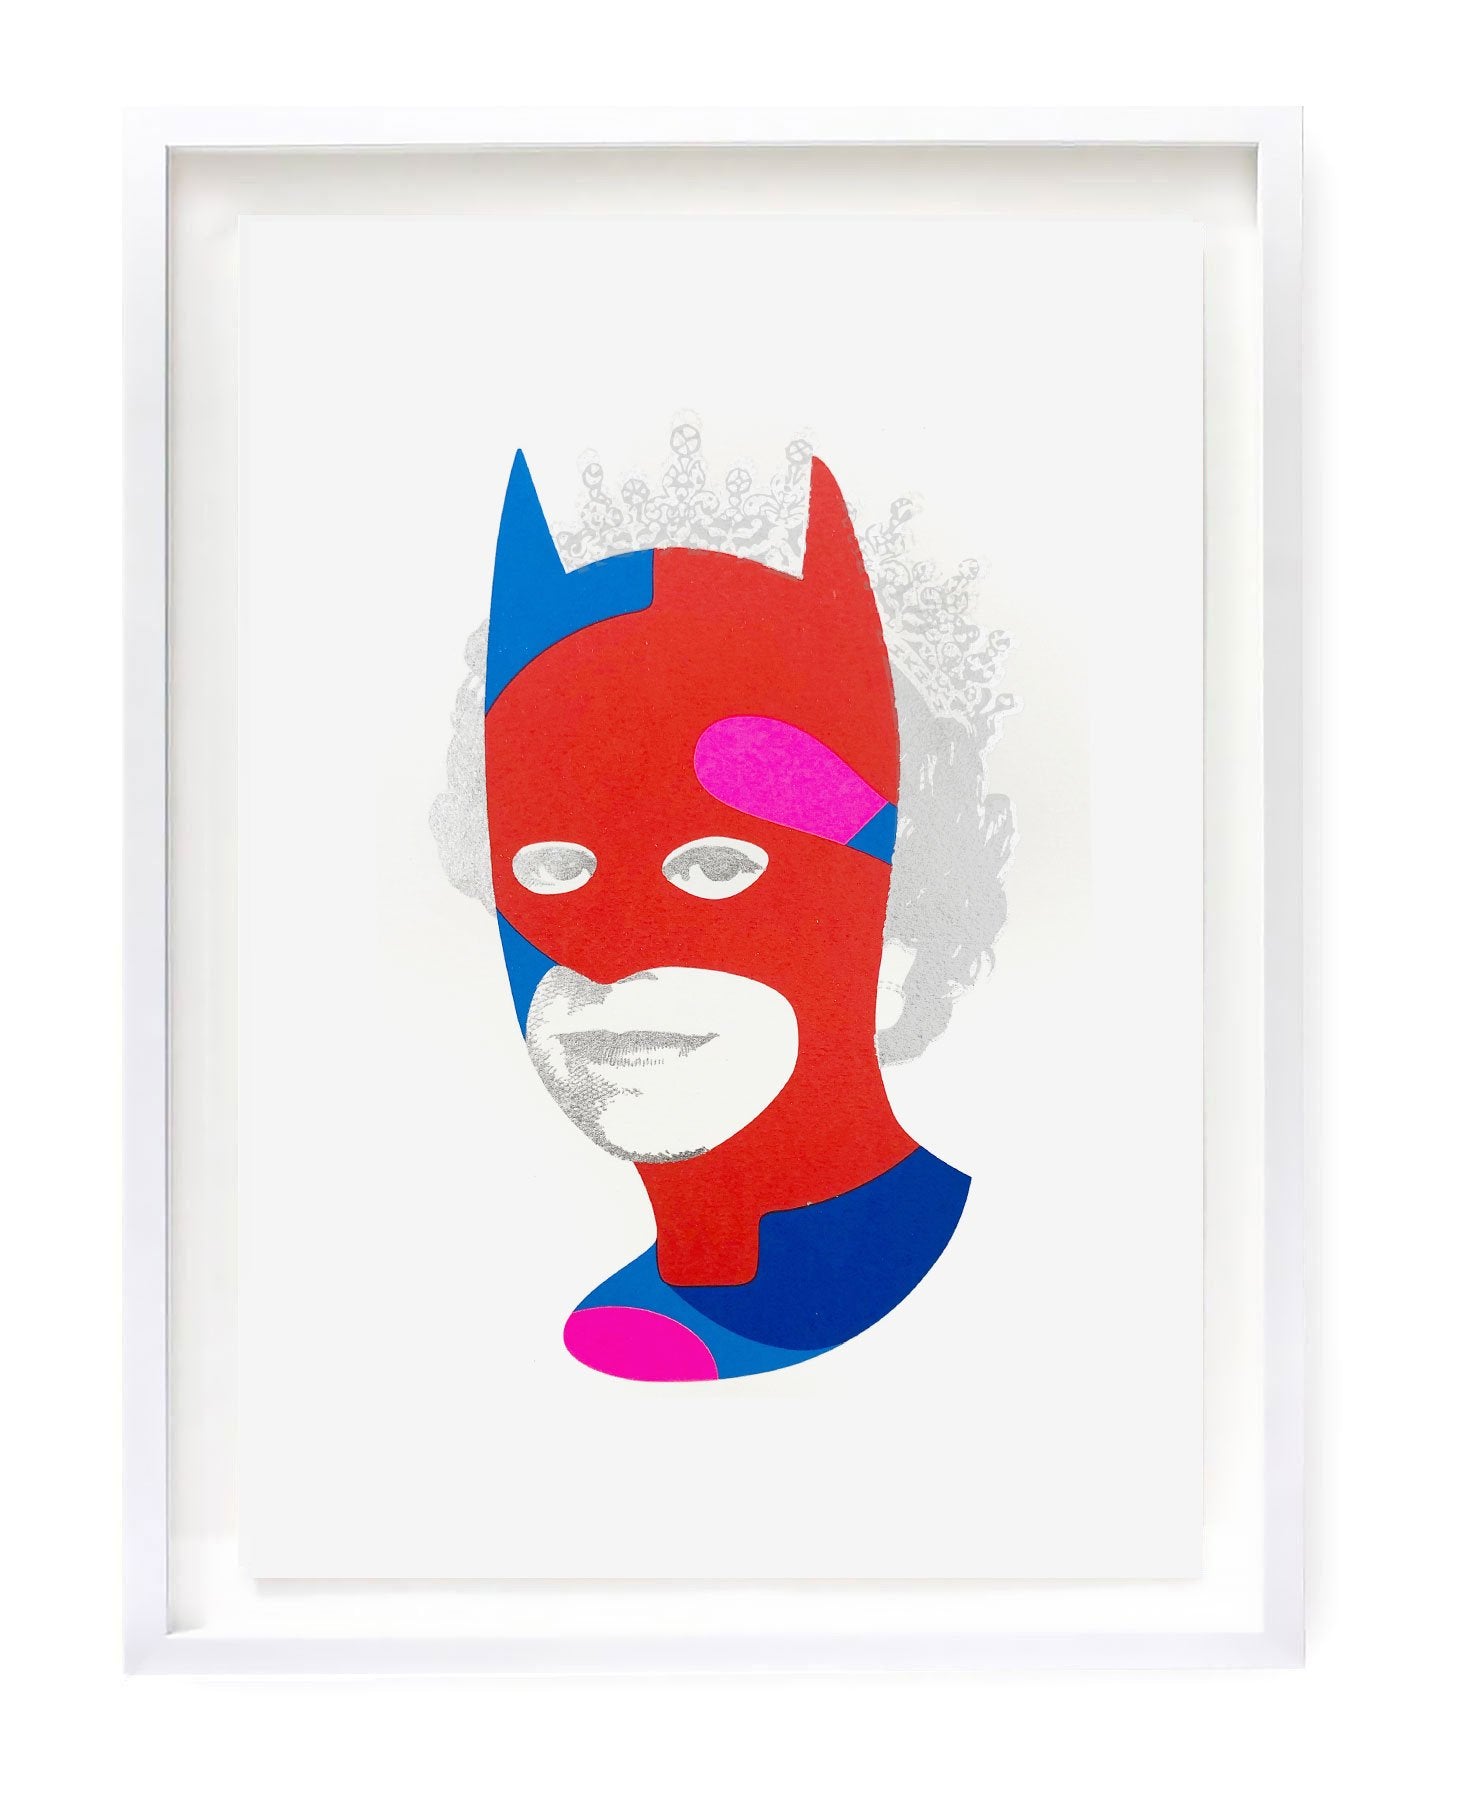 "Rich Enough to be Batman - Red and Silver Dollar Sign" Original Print By Heath Kane